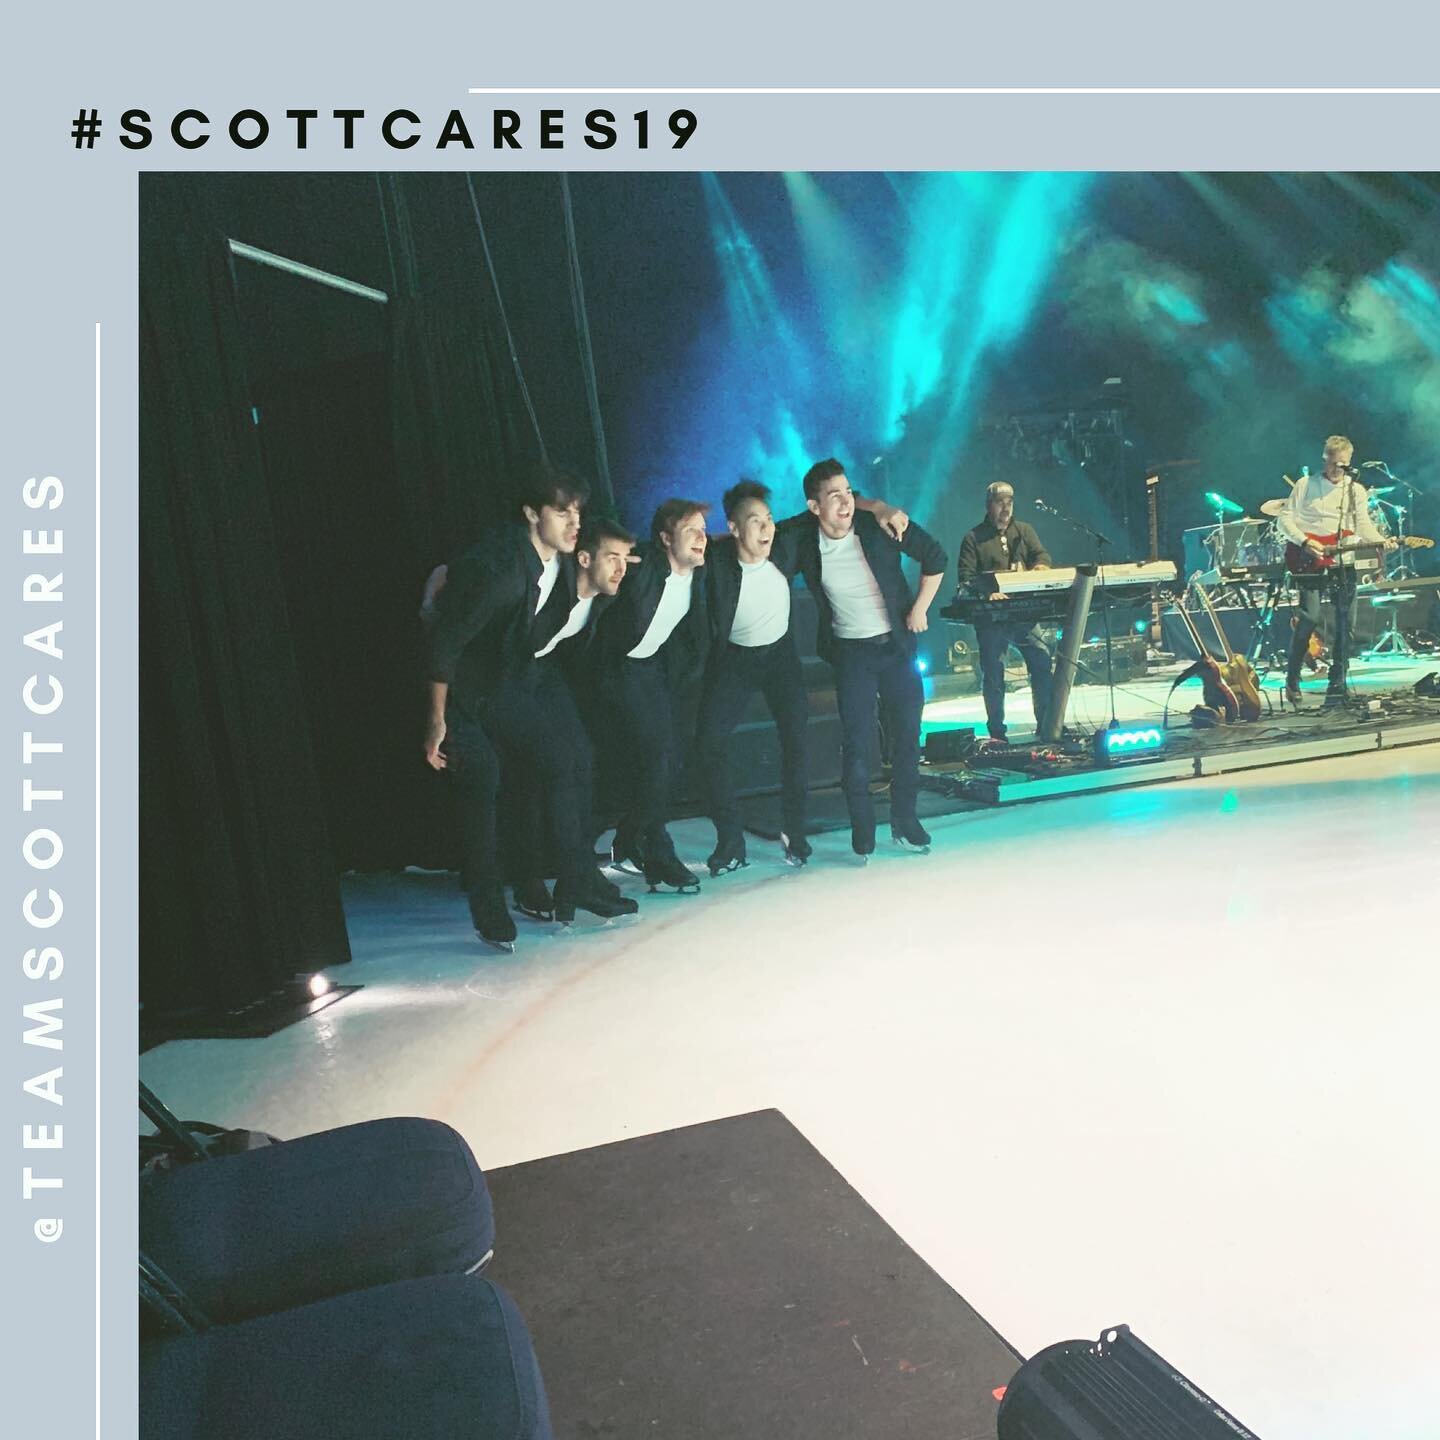 Another great year with @teamscottcares T-3 hours to Scott Hamilton &amp; Friends at Bridgestone arena! Come on out and experience the magic! #scottcares19 #byecancer #35thanniversary🥇#fundraisershow #kennyloggins #footloose1984 #livemusic #figuresk